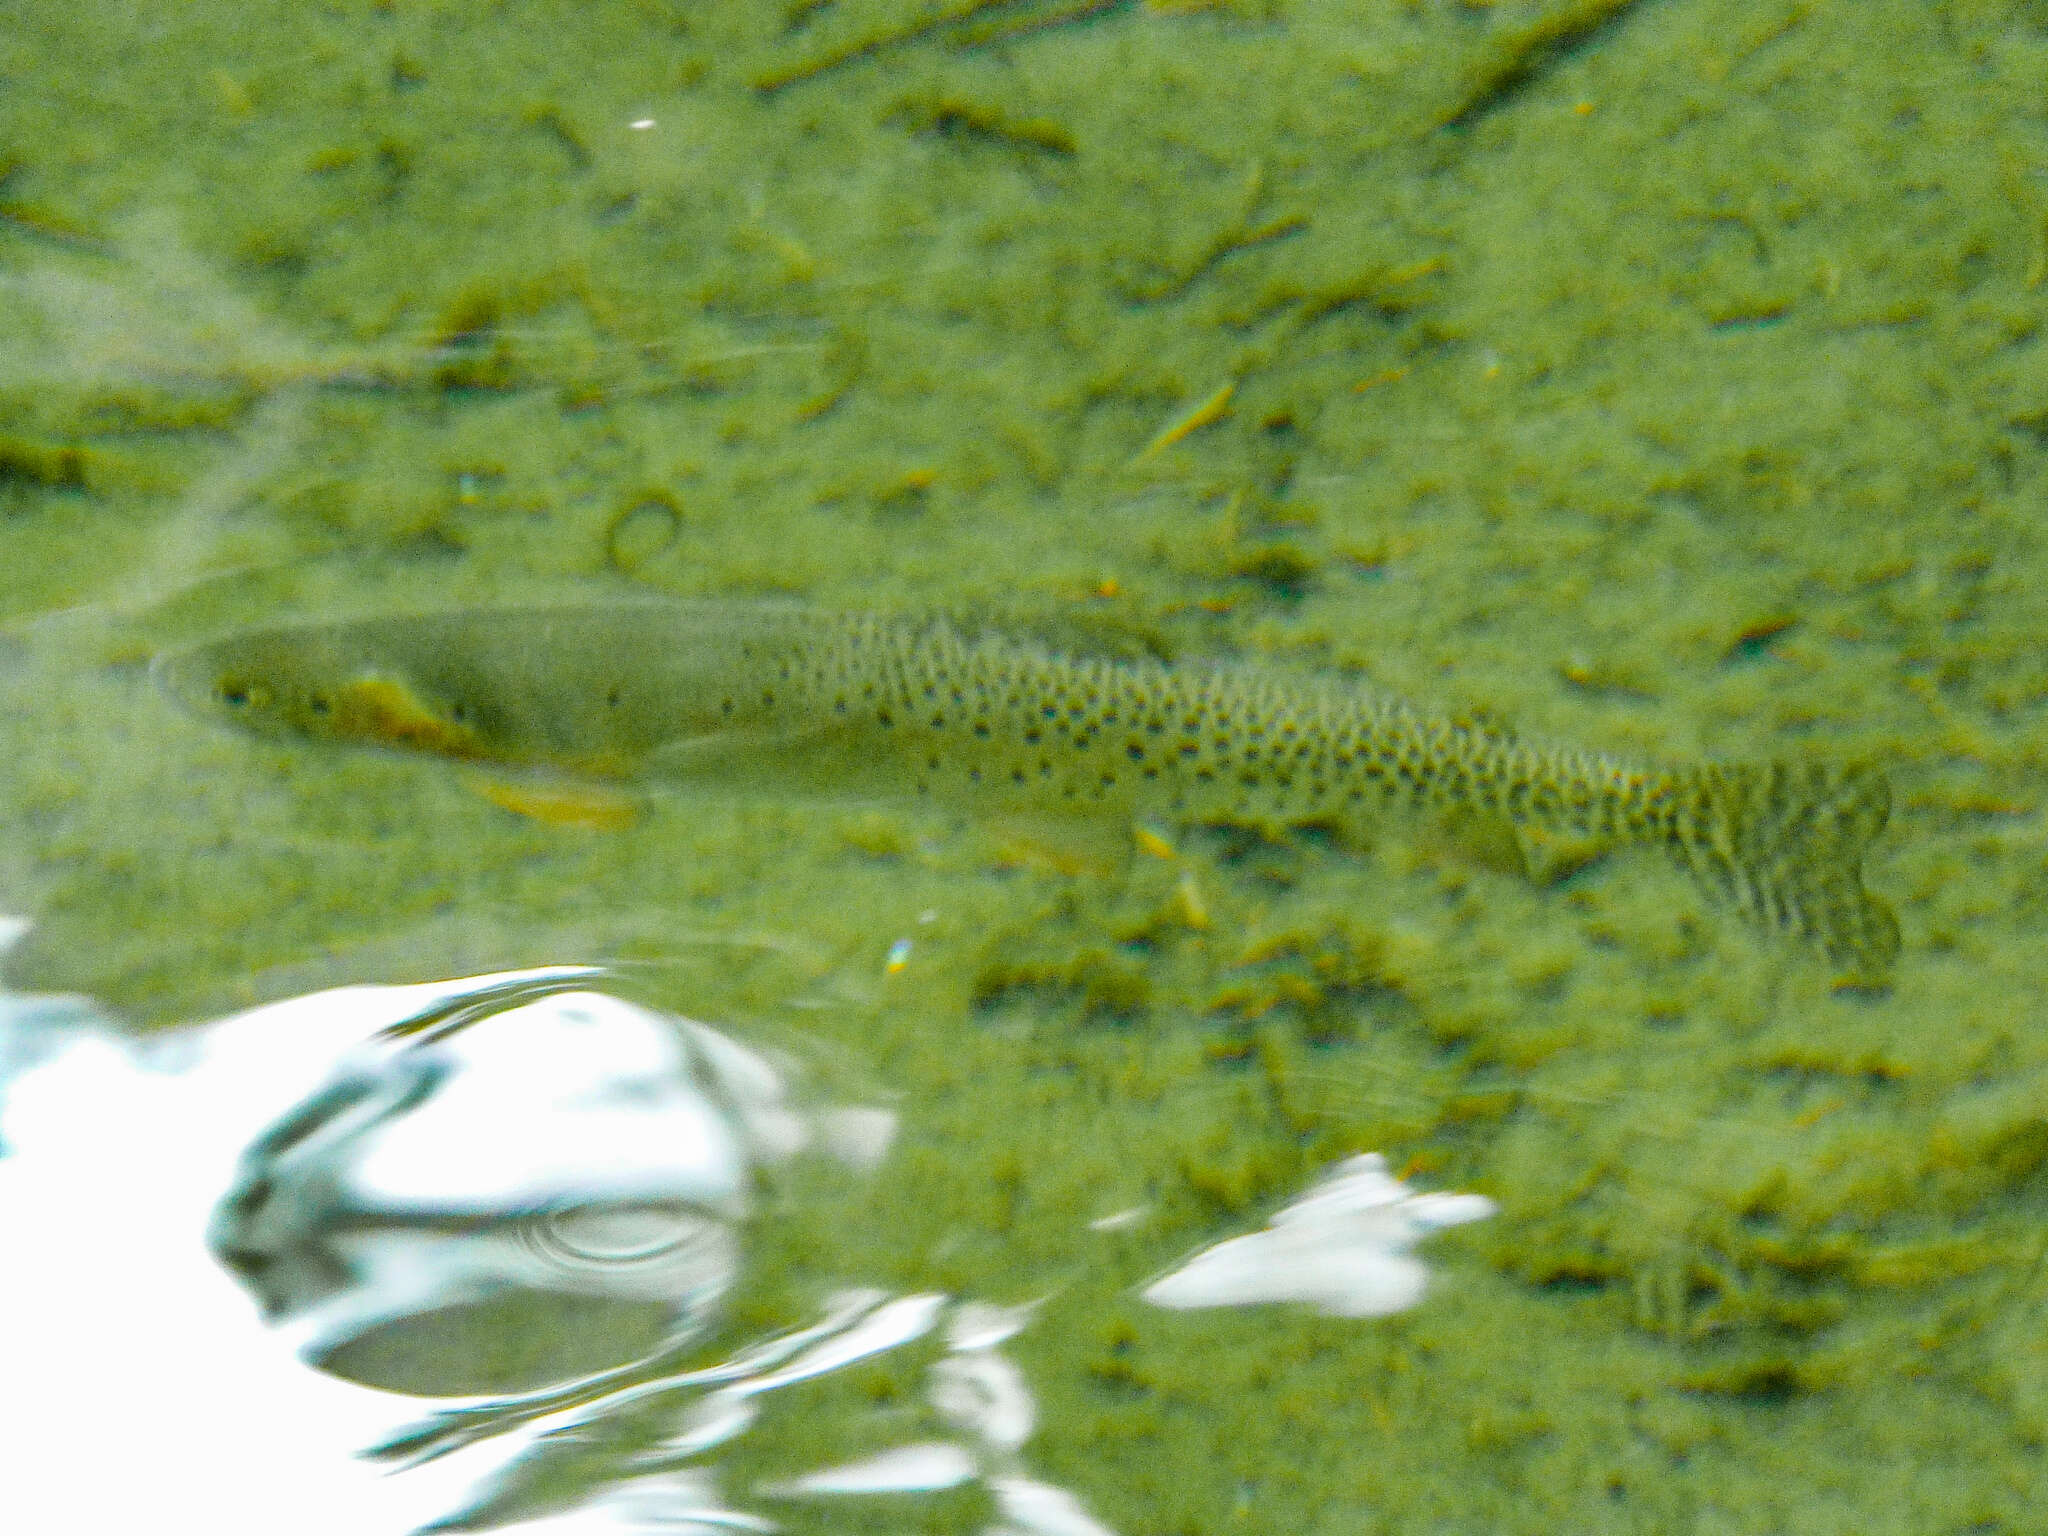 Image of cutthroat trout